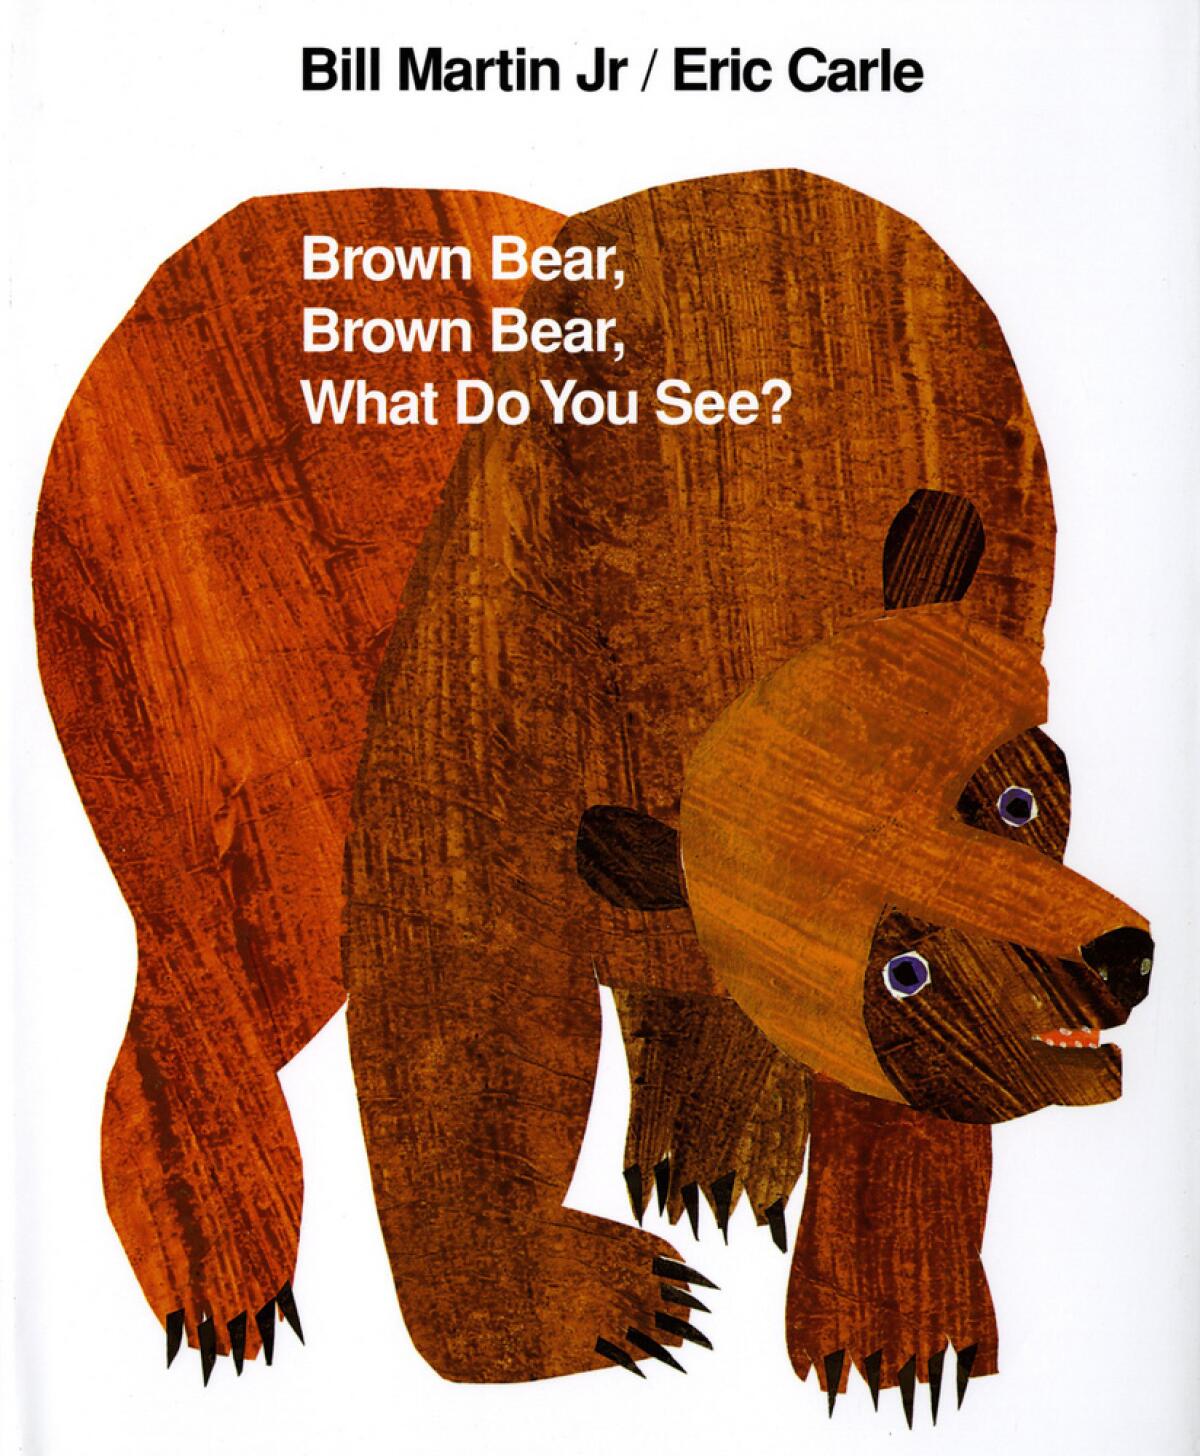 "Brown Bear, Brown Bear, What Do You See?" by Eric Carle and Bill Martin Jr.